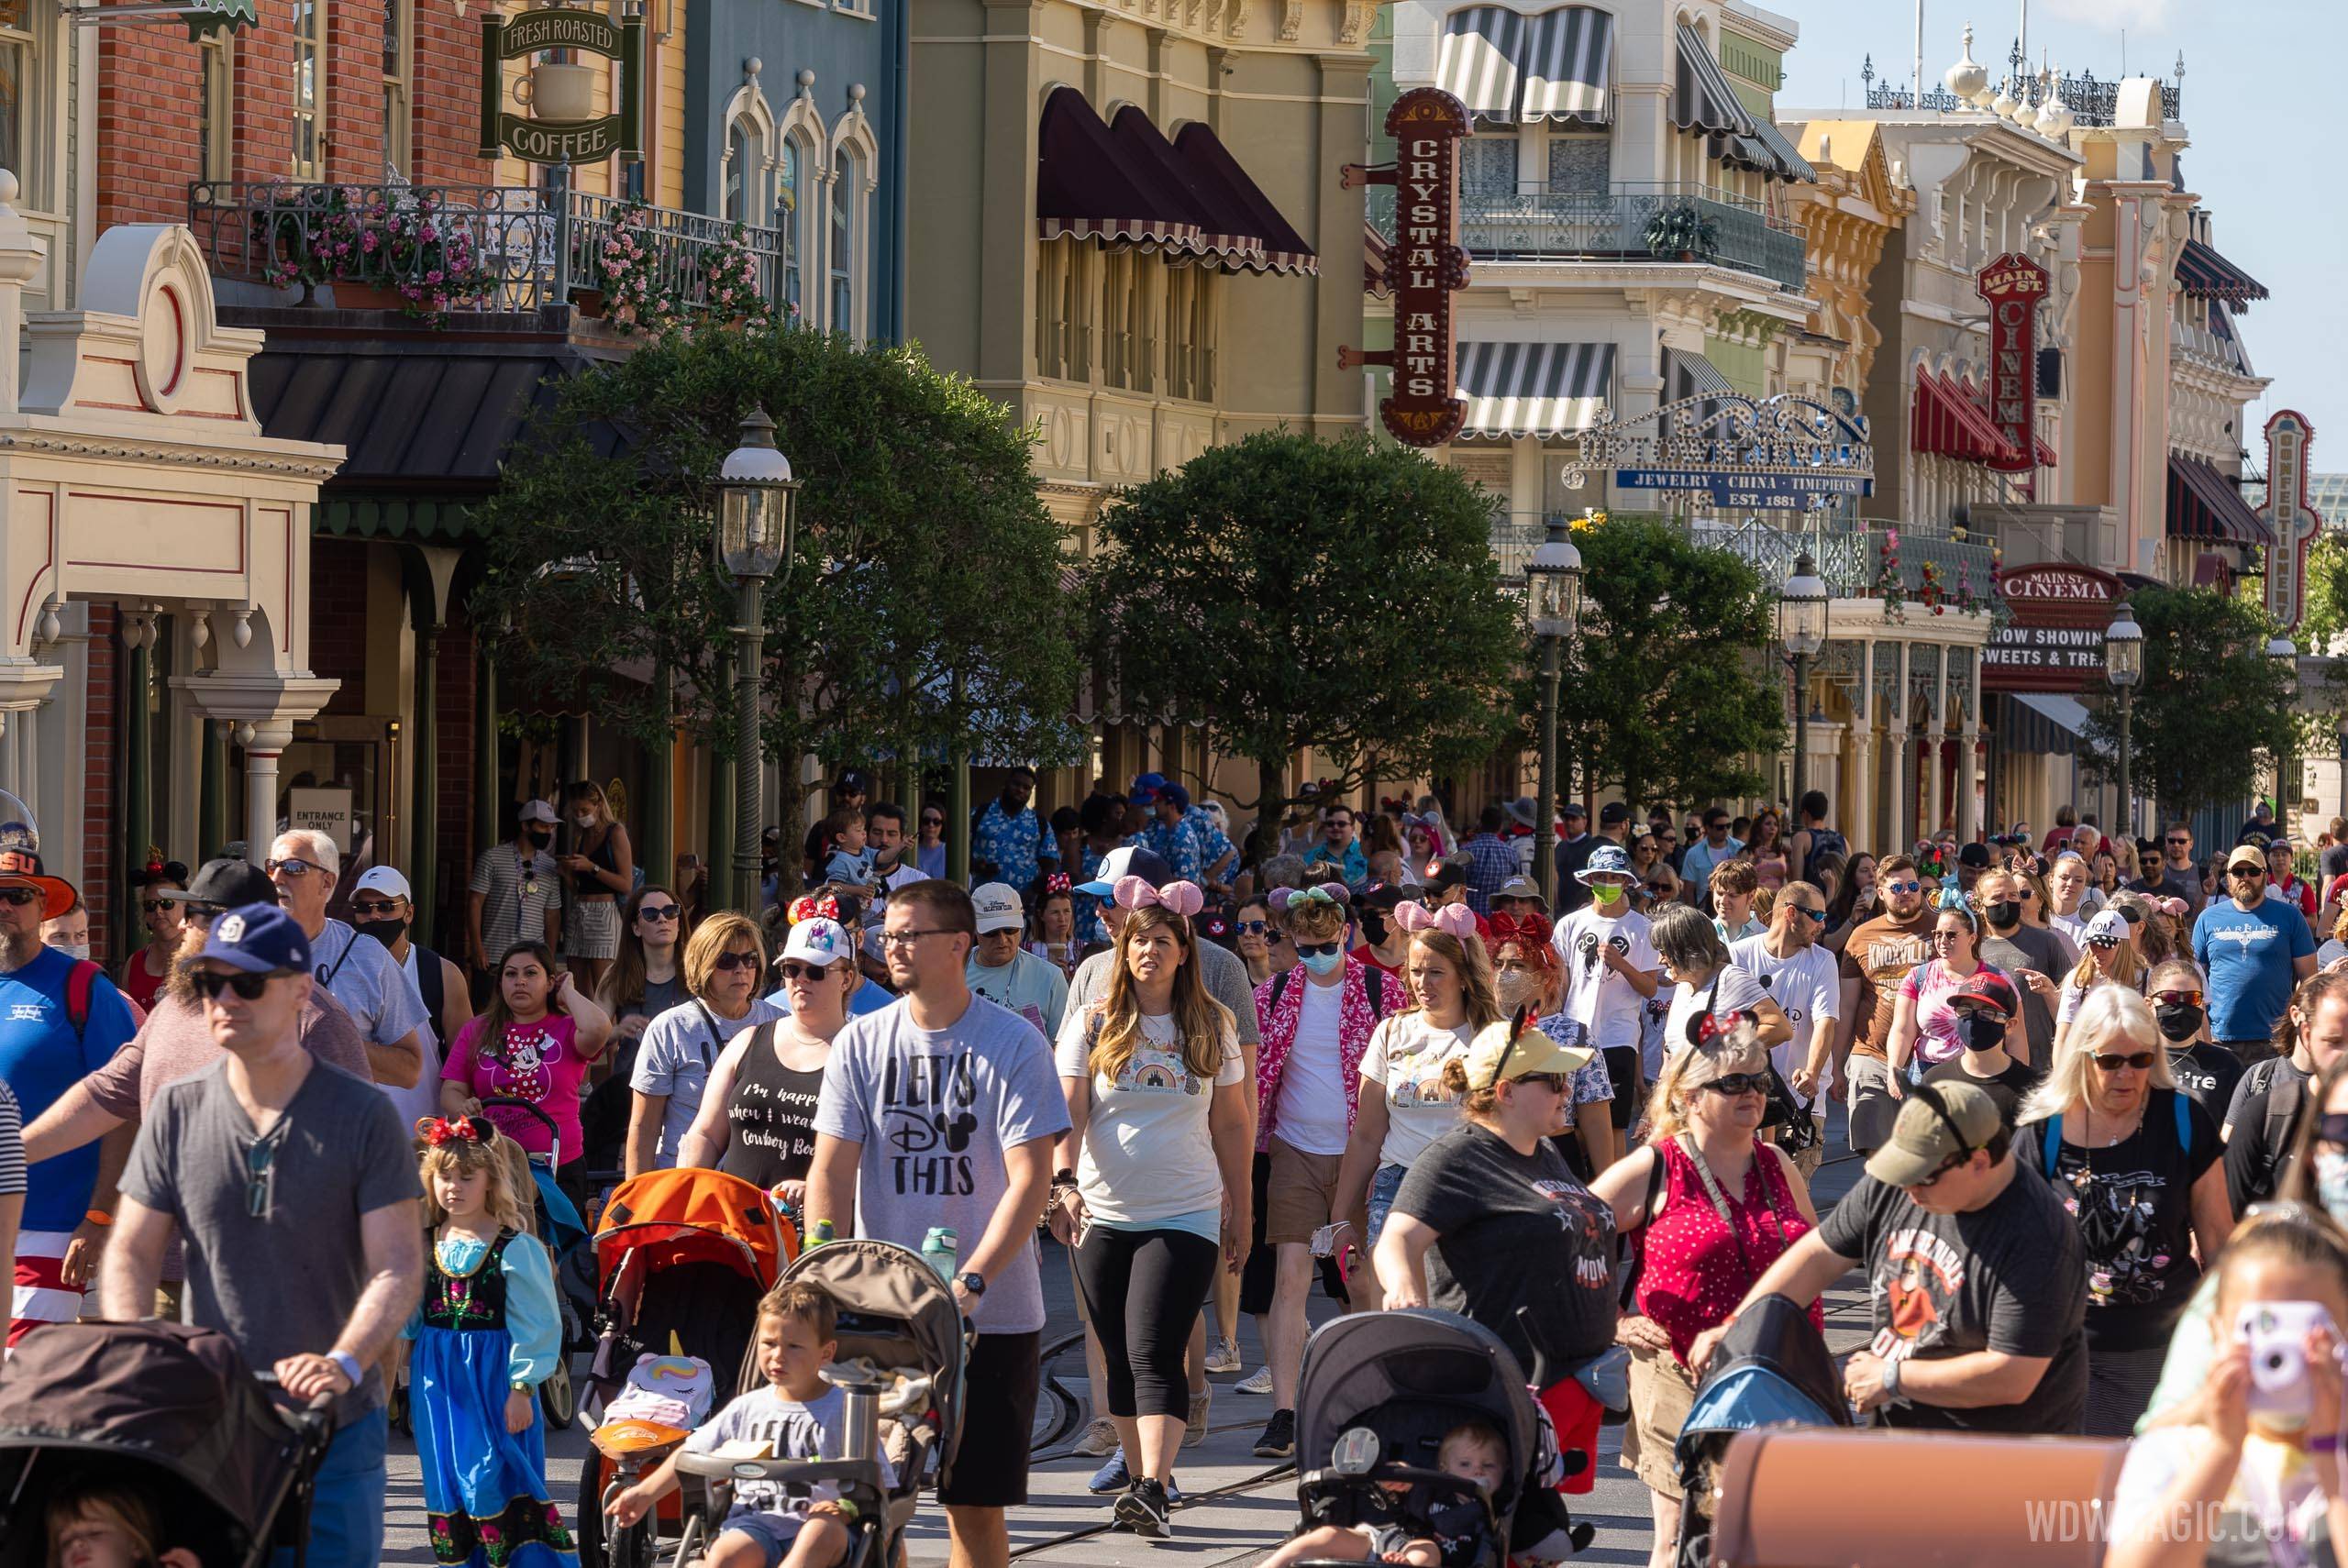 Guests walking along Main Street U.S.A. with new optional masks rules in place